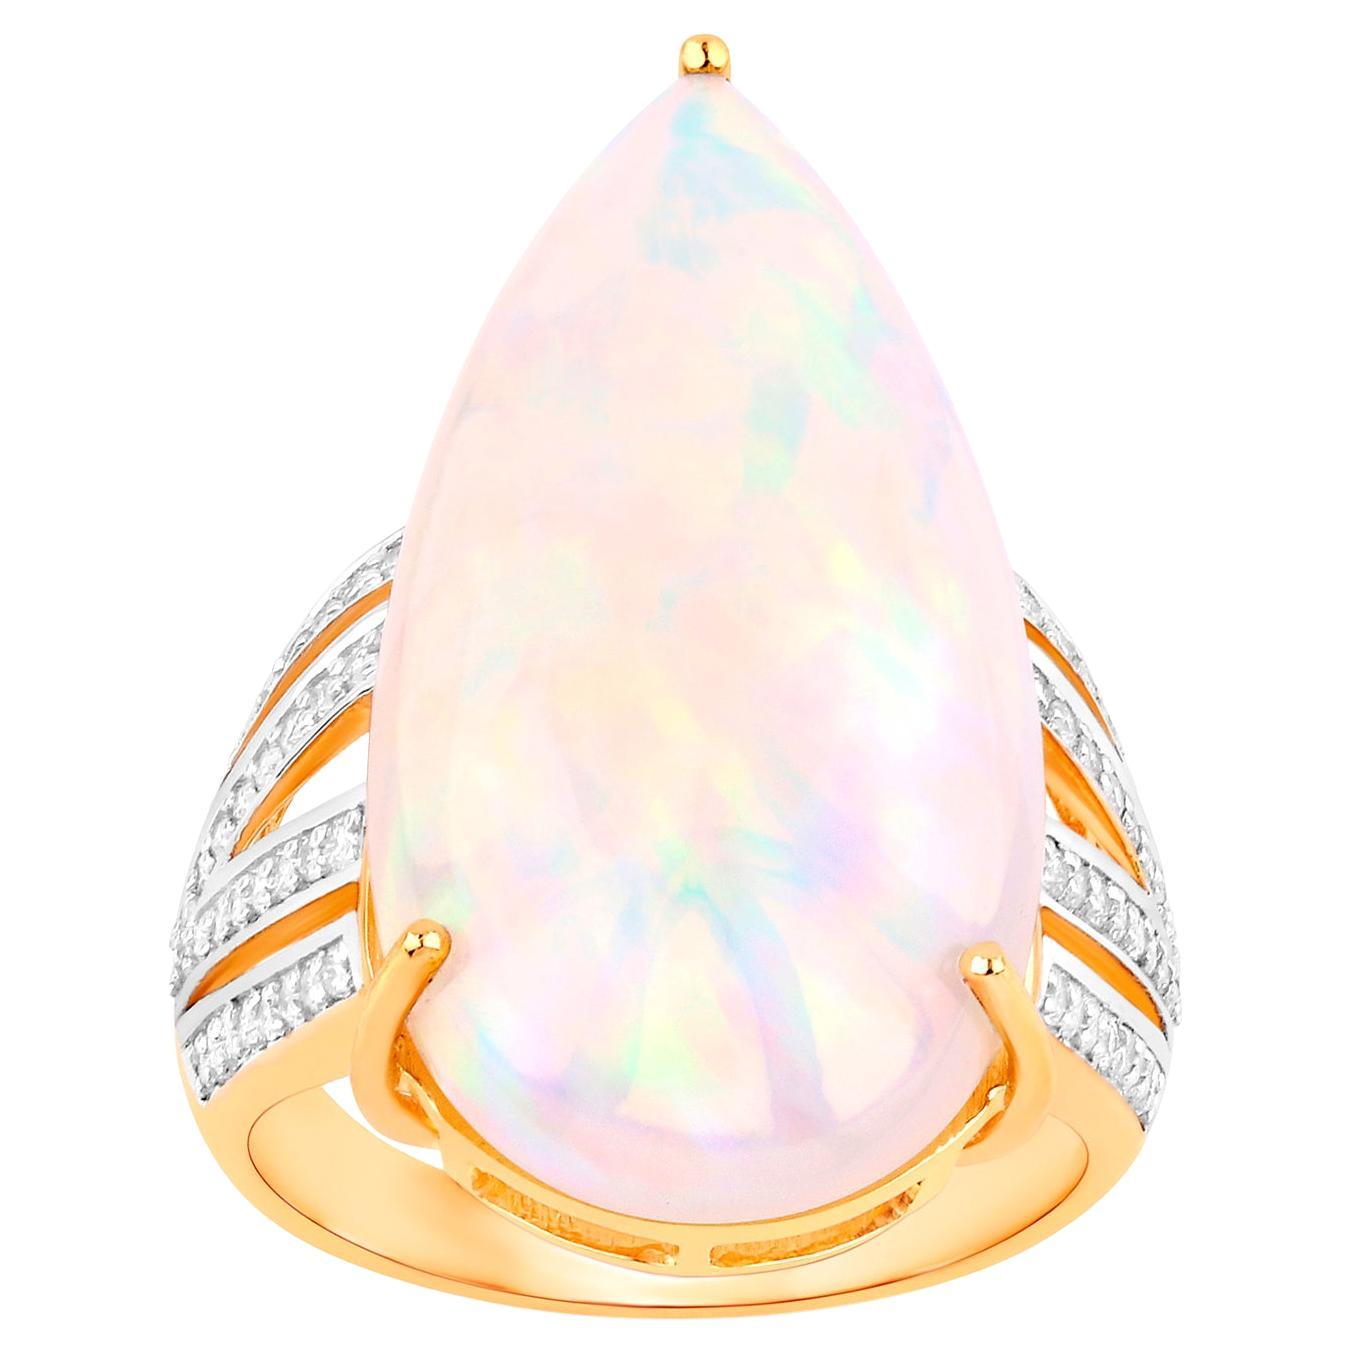 Important Natural 12 Carat Ethiopian Opal Cocktail Ring Diamond Setting 14K Gold For Sale